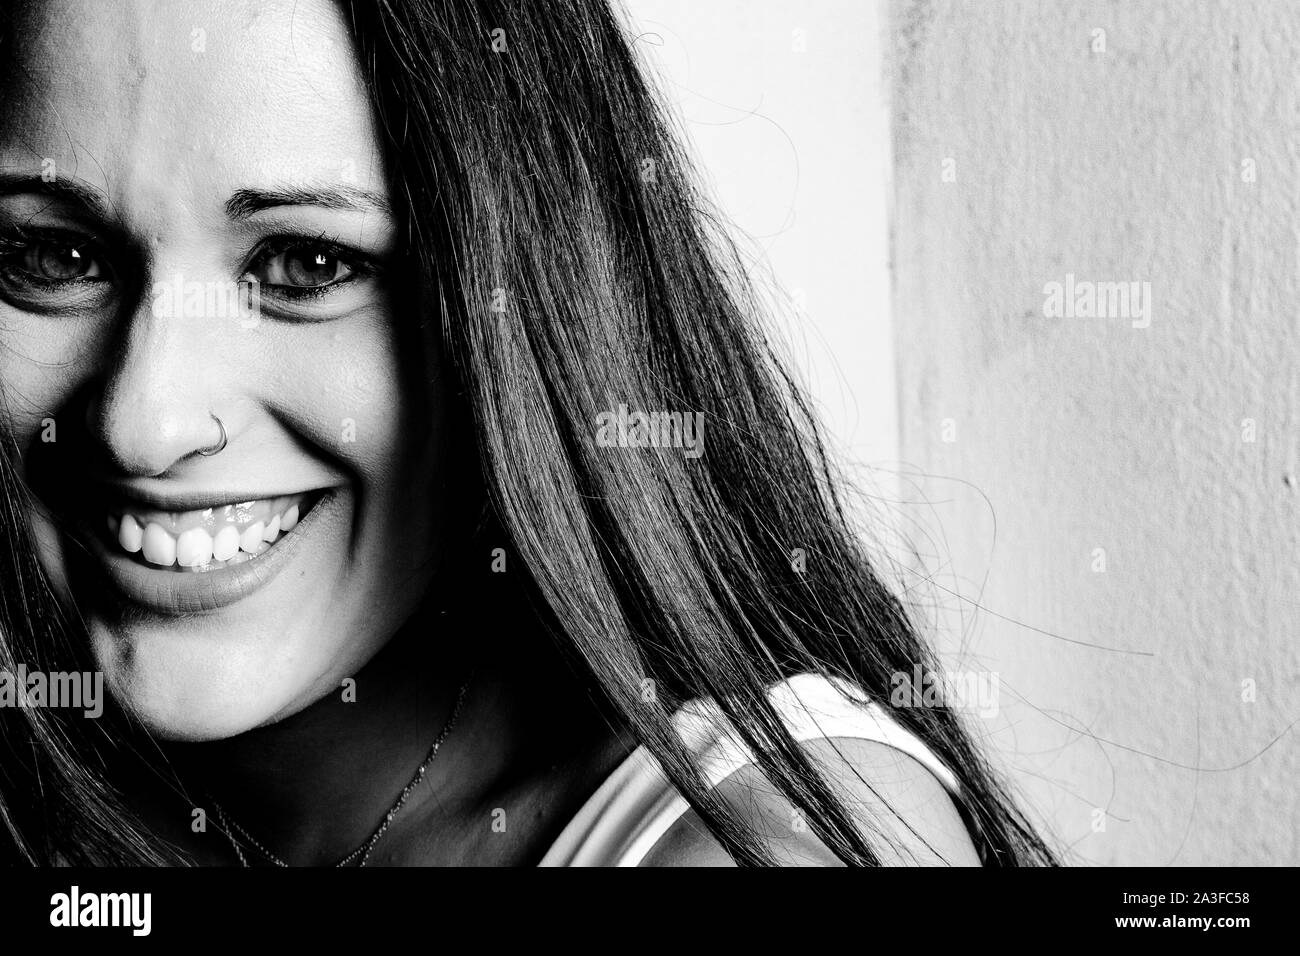 studio lighting portrait of a young woman smiling with expressive eyes Stock Photo